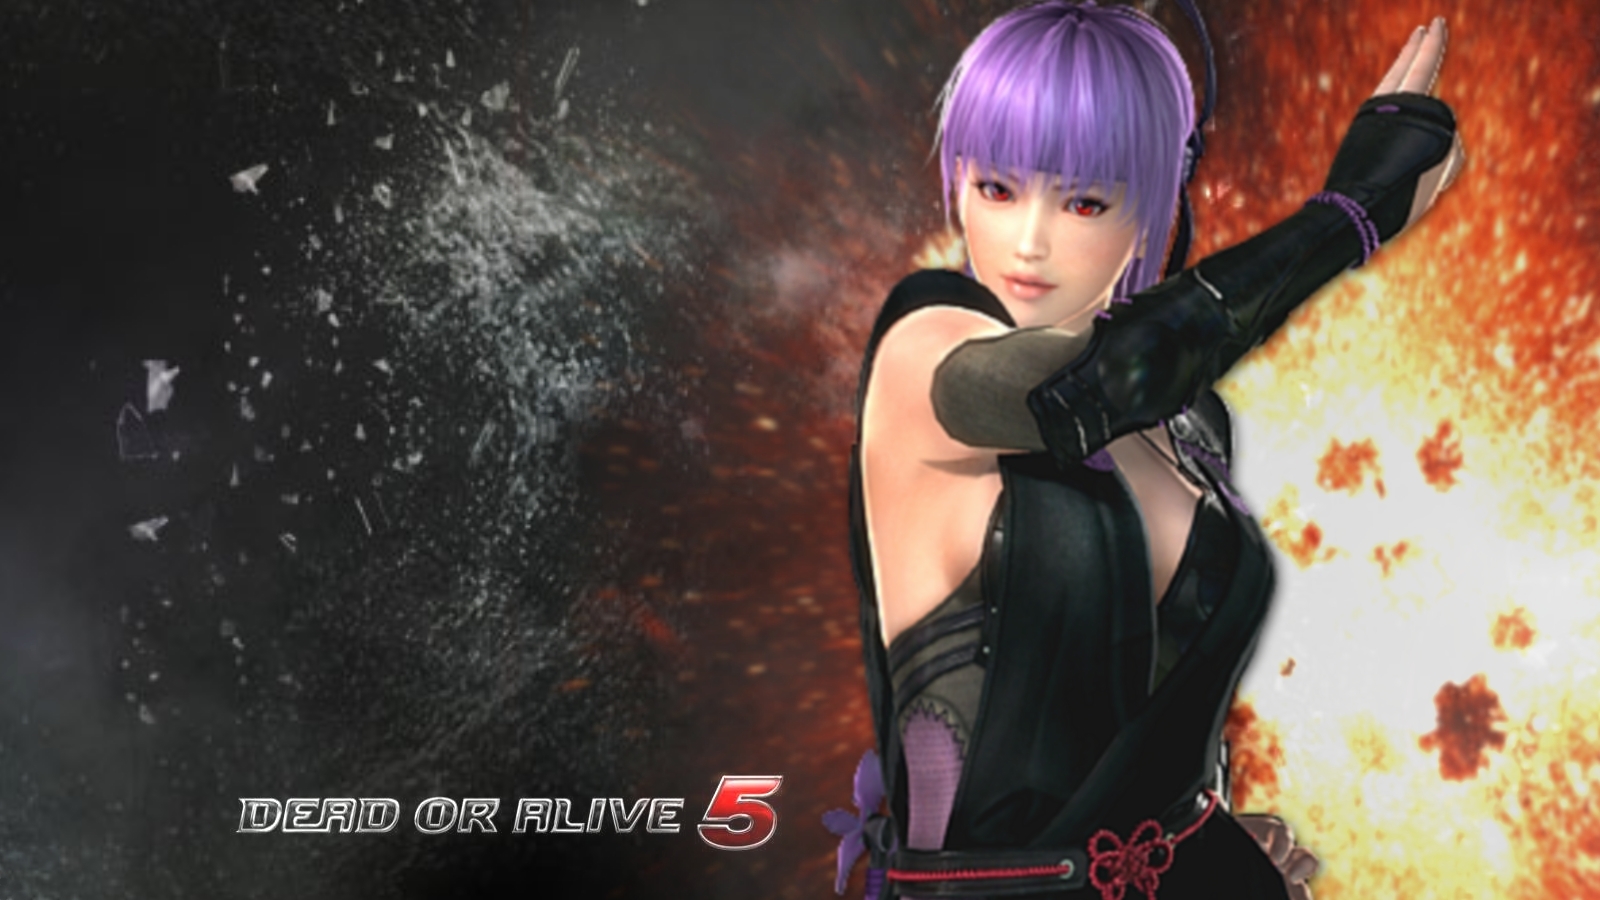 Free Download Ayane Dead Or Alive 5 Wallpaper [1600x900] For Your